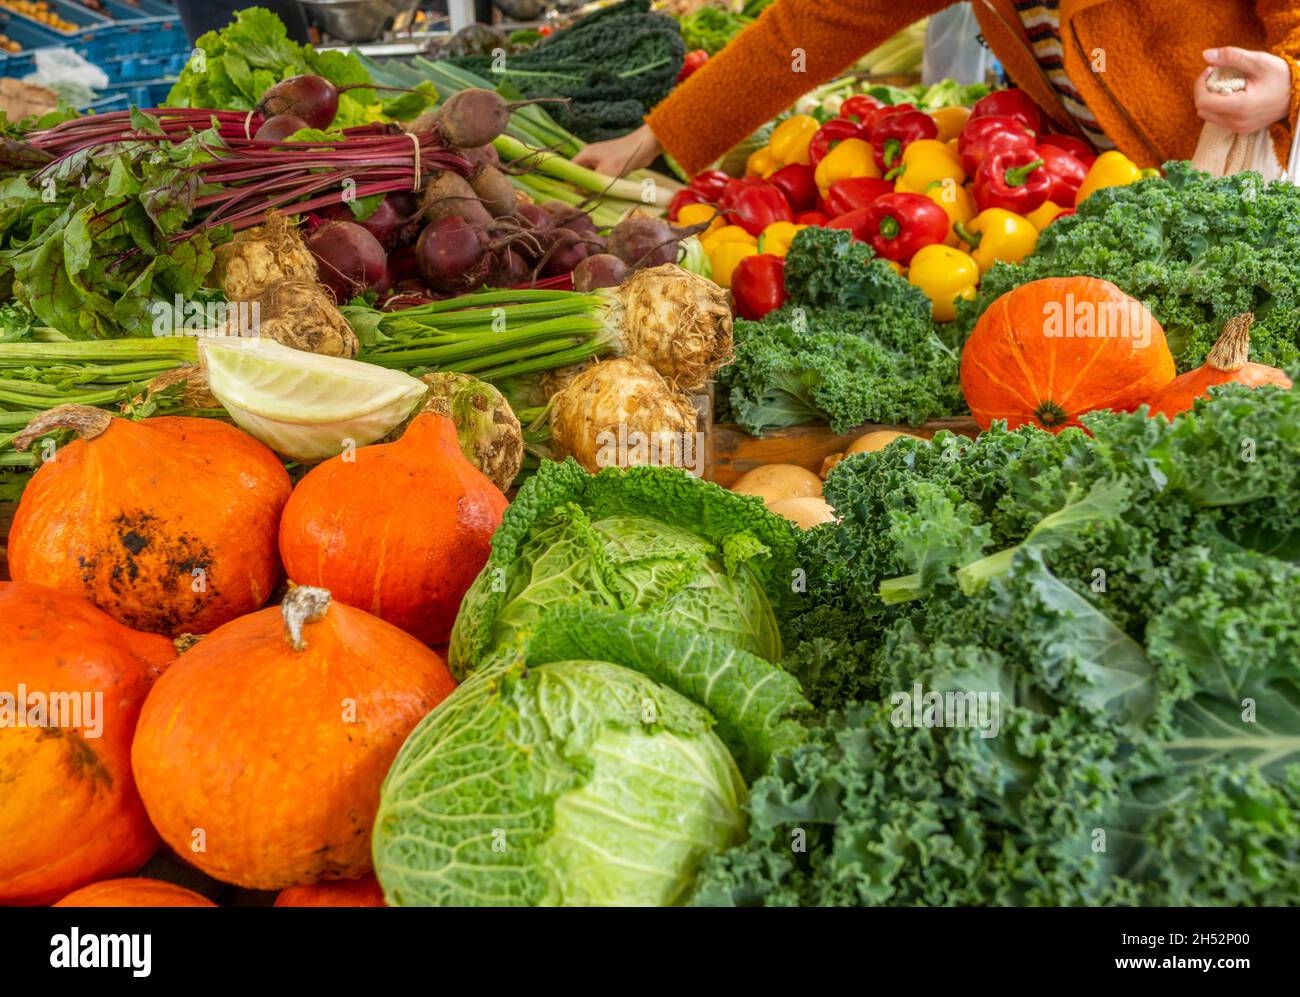 Netherlands. Farmers market in Amsterdam. Buyer and many ripe greenery and vegetables Stock Photo